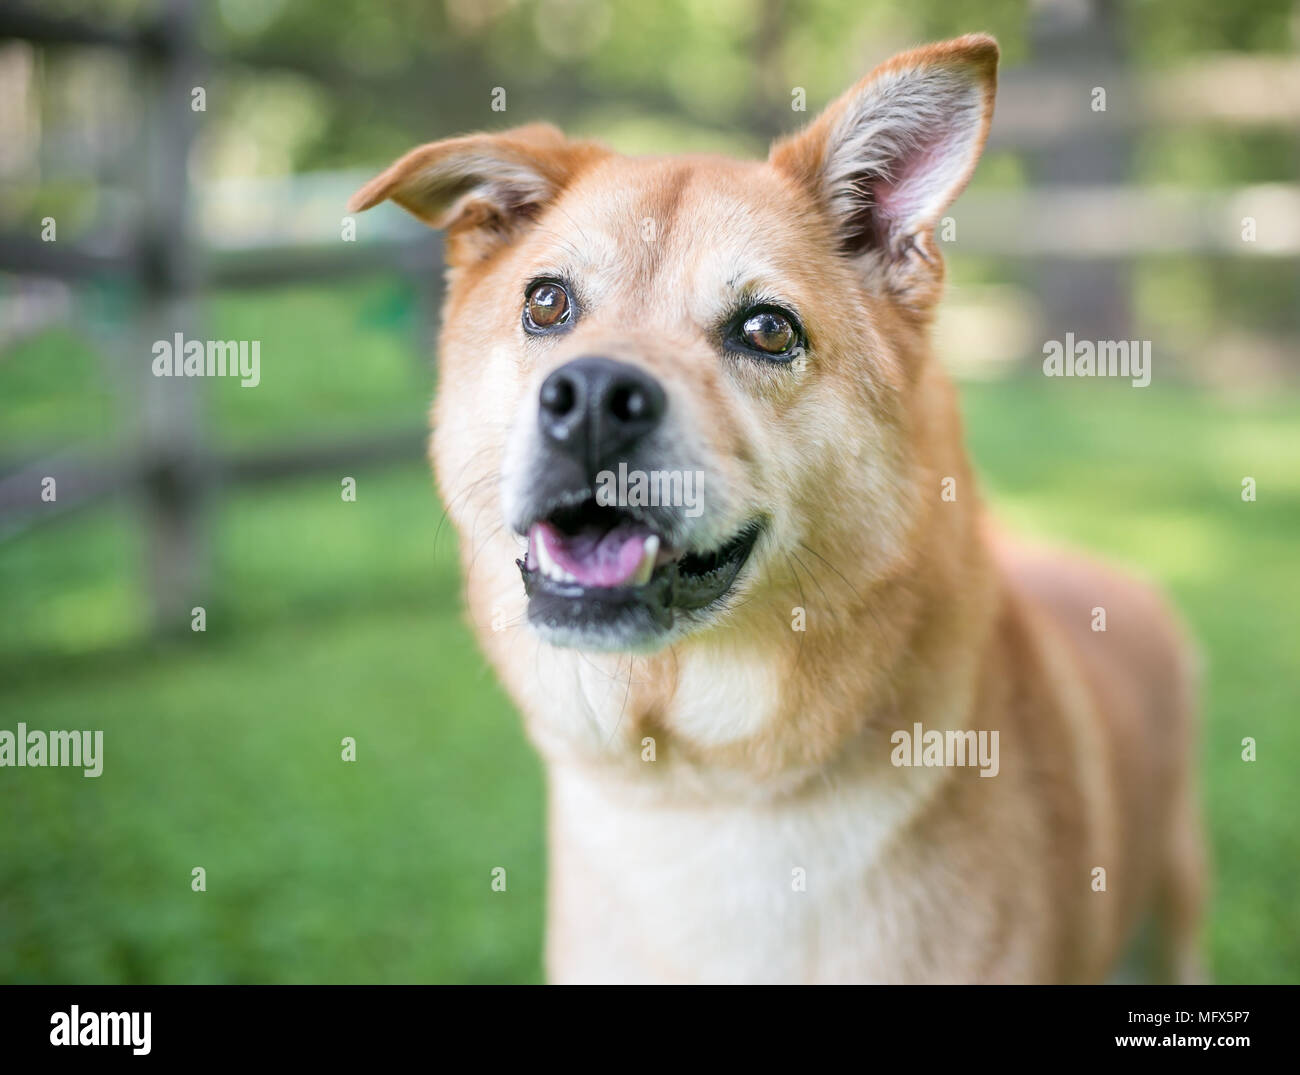 A Shiba Inu Mixed Breed Dog With One Floppy Ear And One Straight Ear Stock Photo Alamy